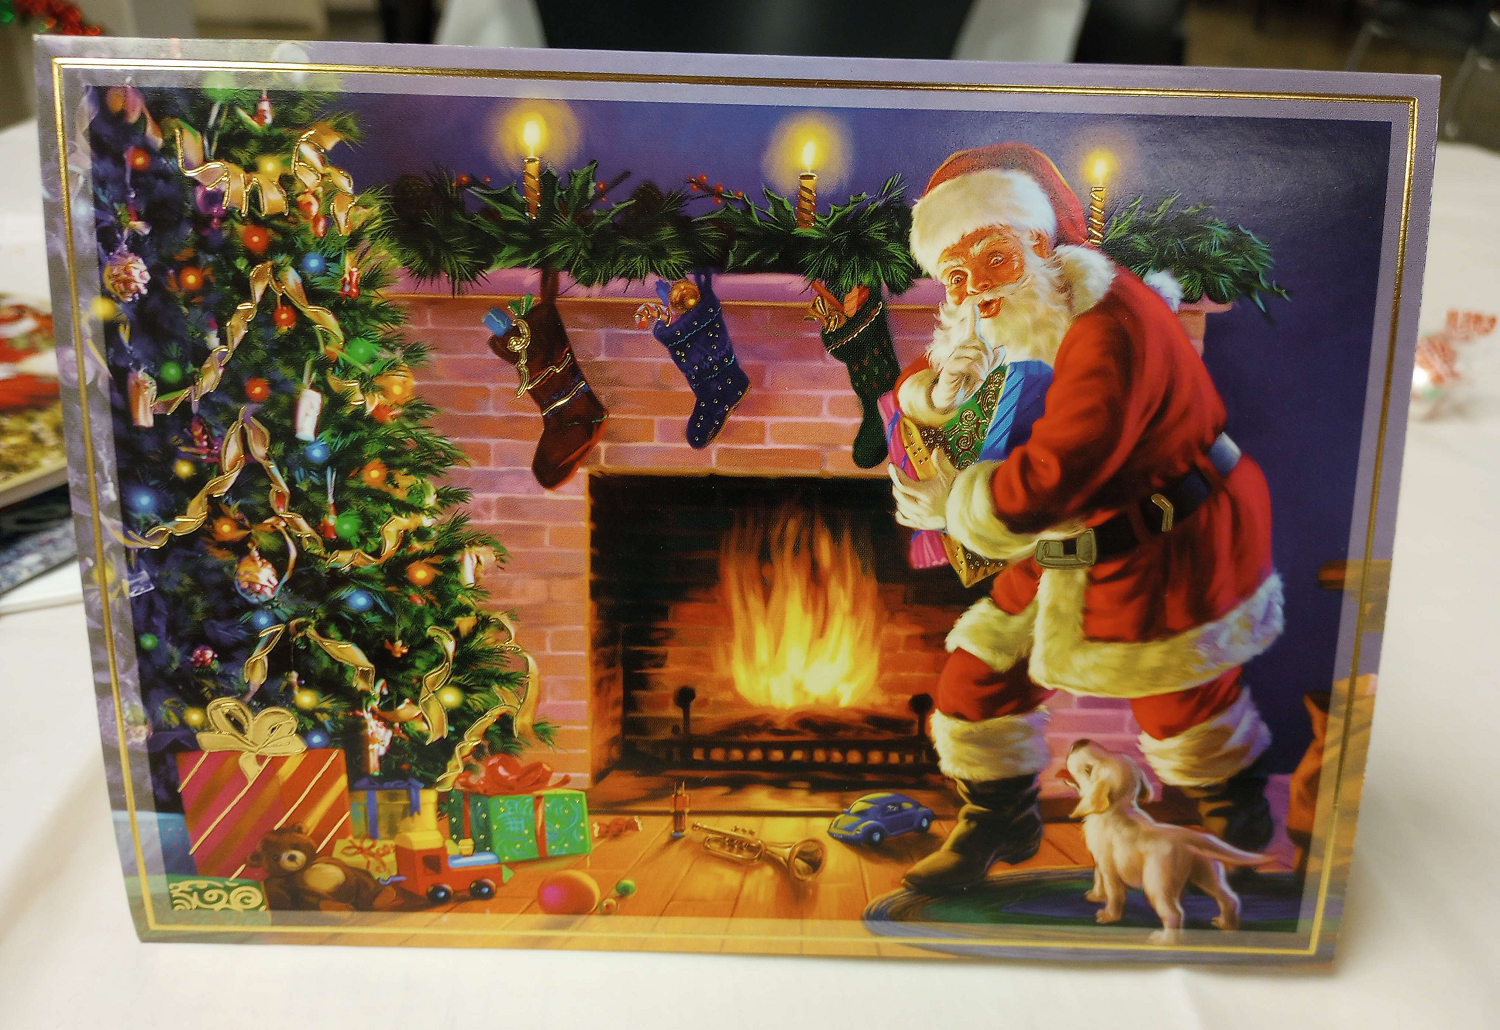 A sinister Santa Claus is seen shushing a small dog by a roaring fire.